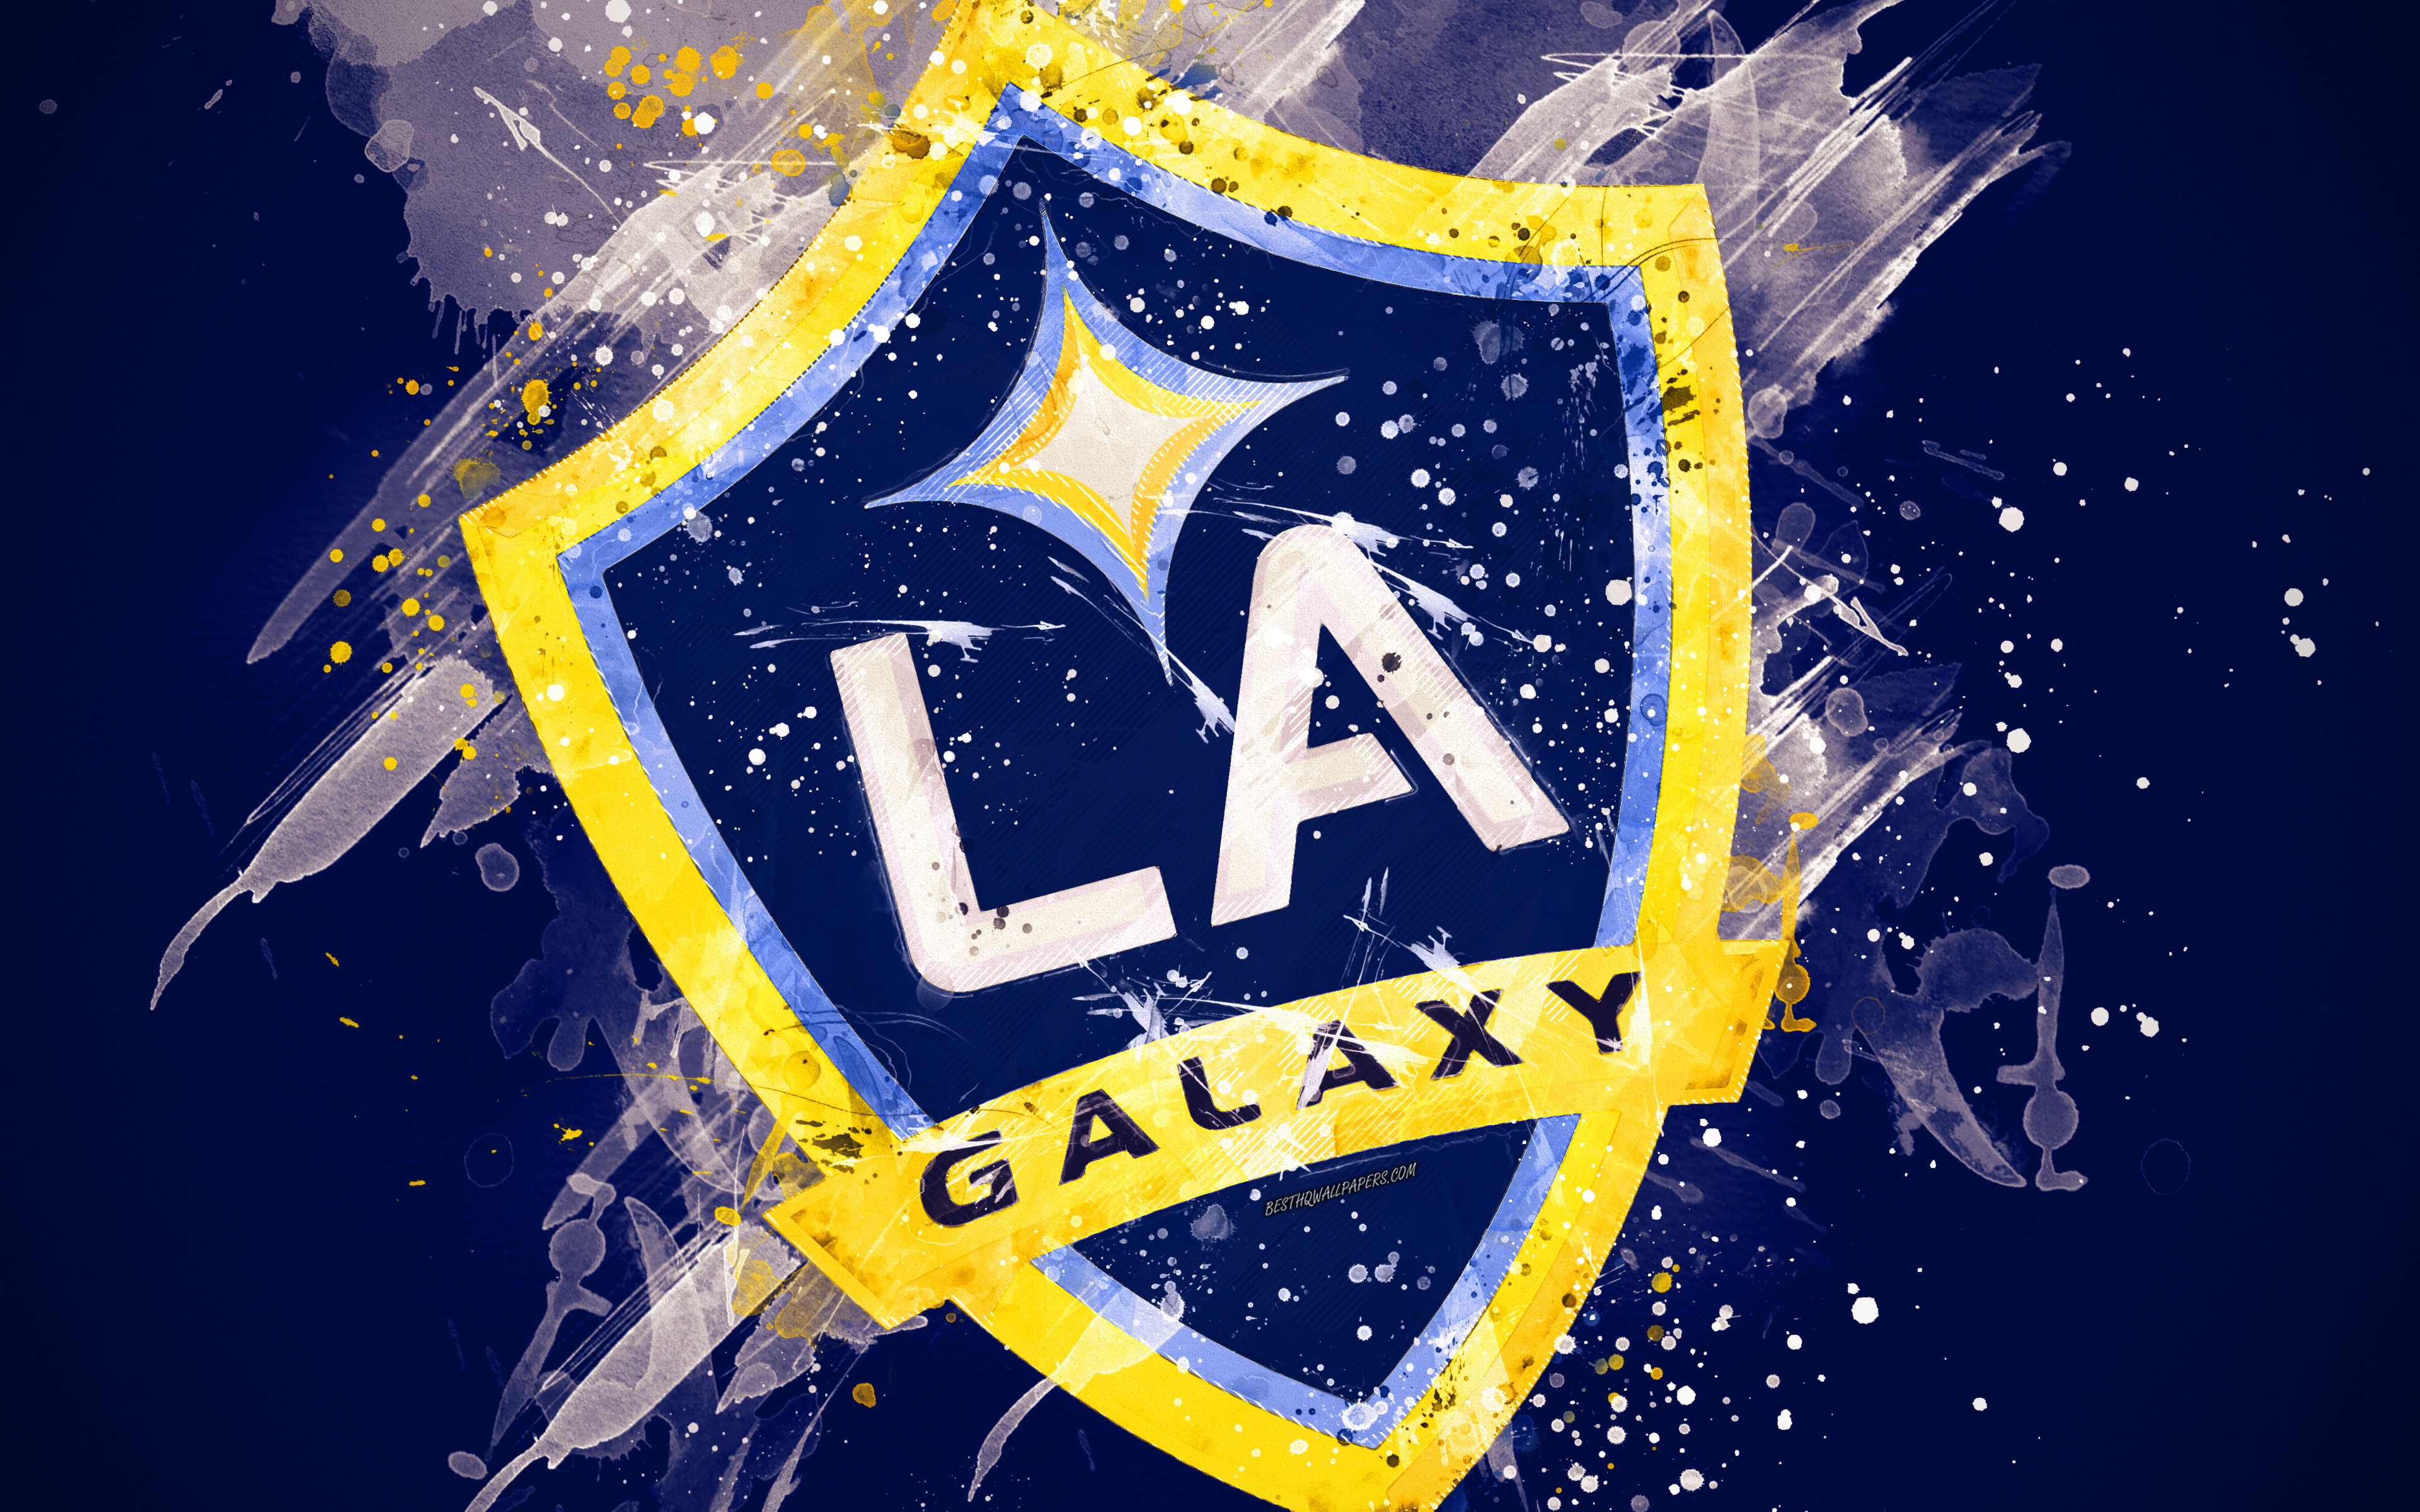 LA Galaxy  Graphic designer Edward Guag created a series of iPhone  wallpapers of each Galaxy kit since the teams inception in 1996  httplaglxycom1qp50MD  Facebook